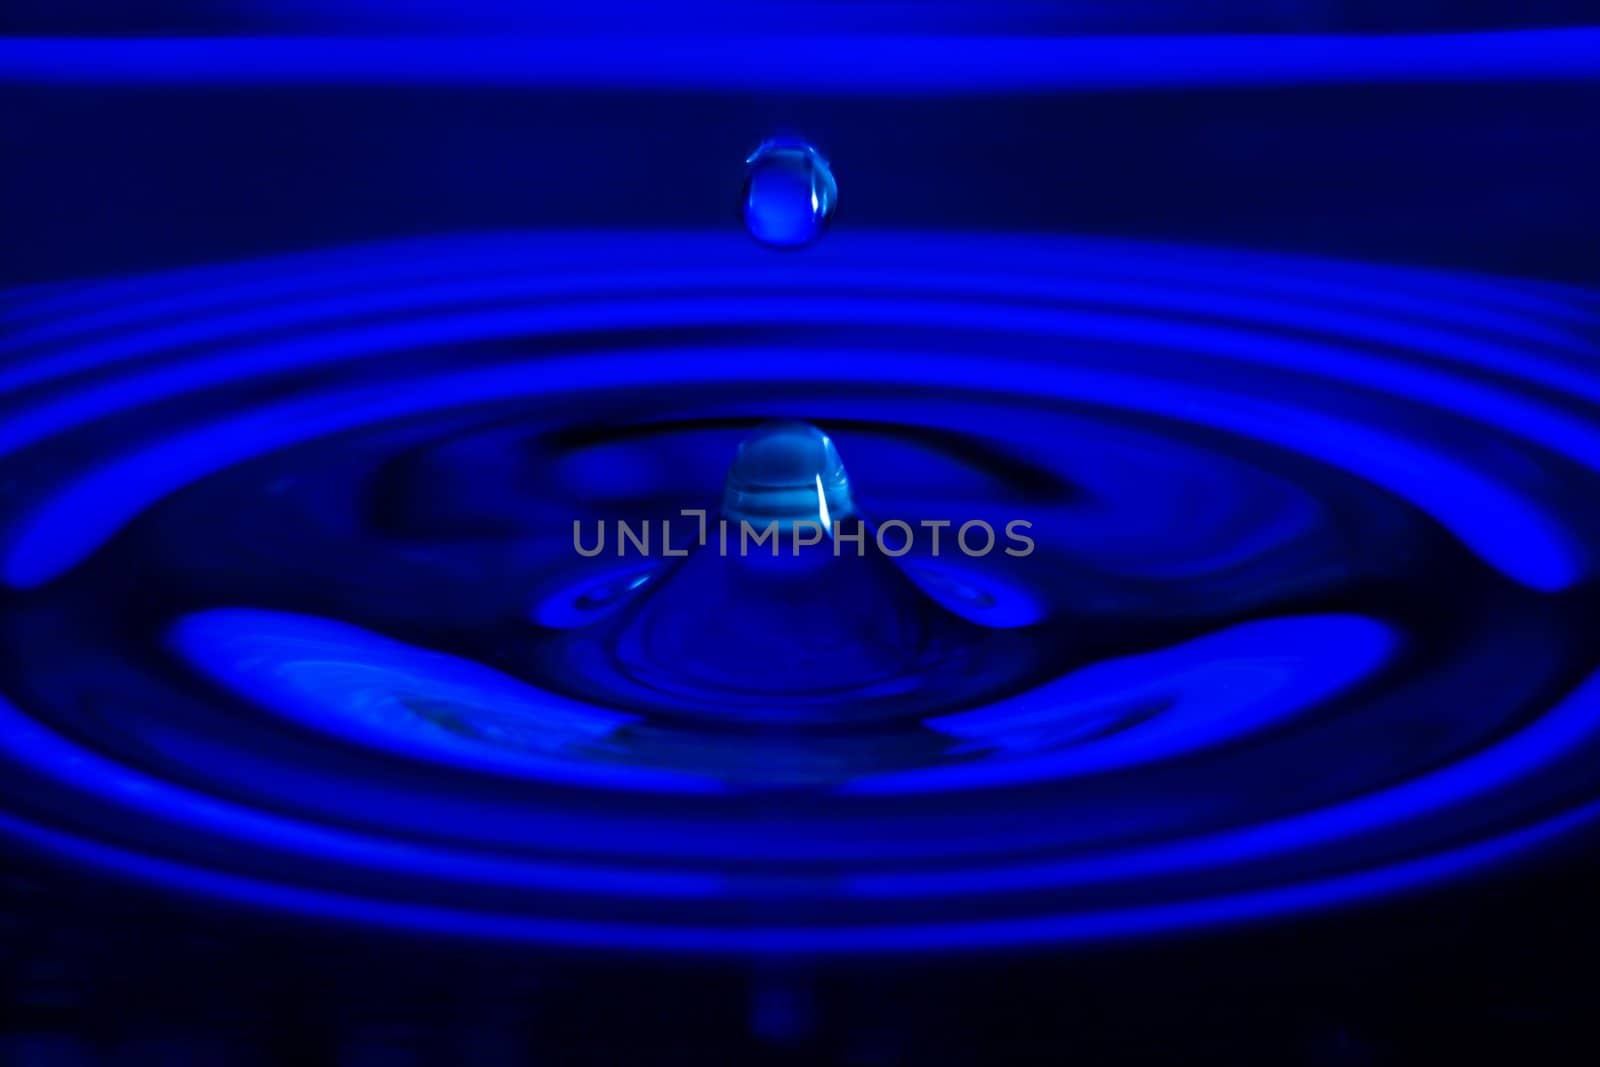 The water drop falls in dark blue water with dispersing circles close up
